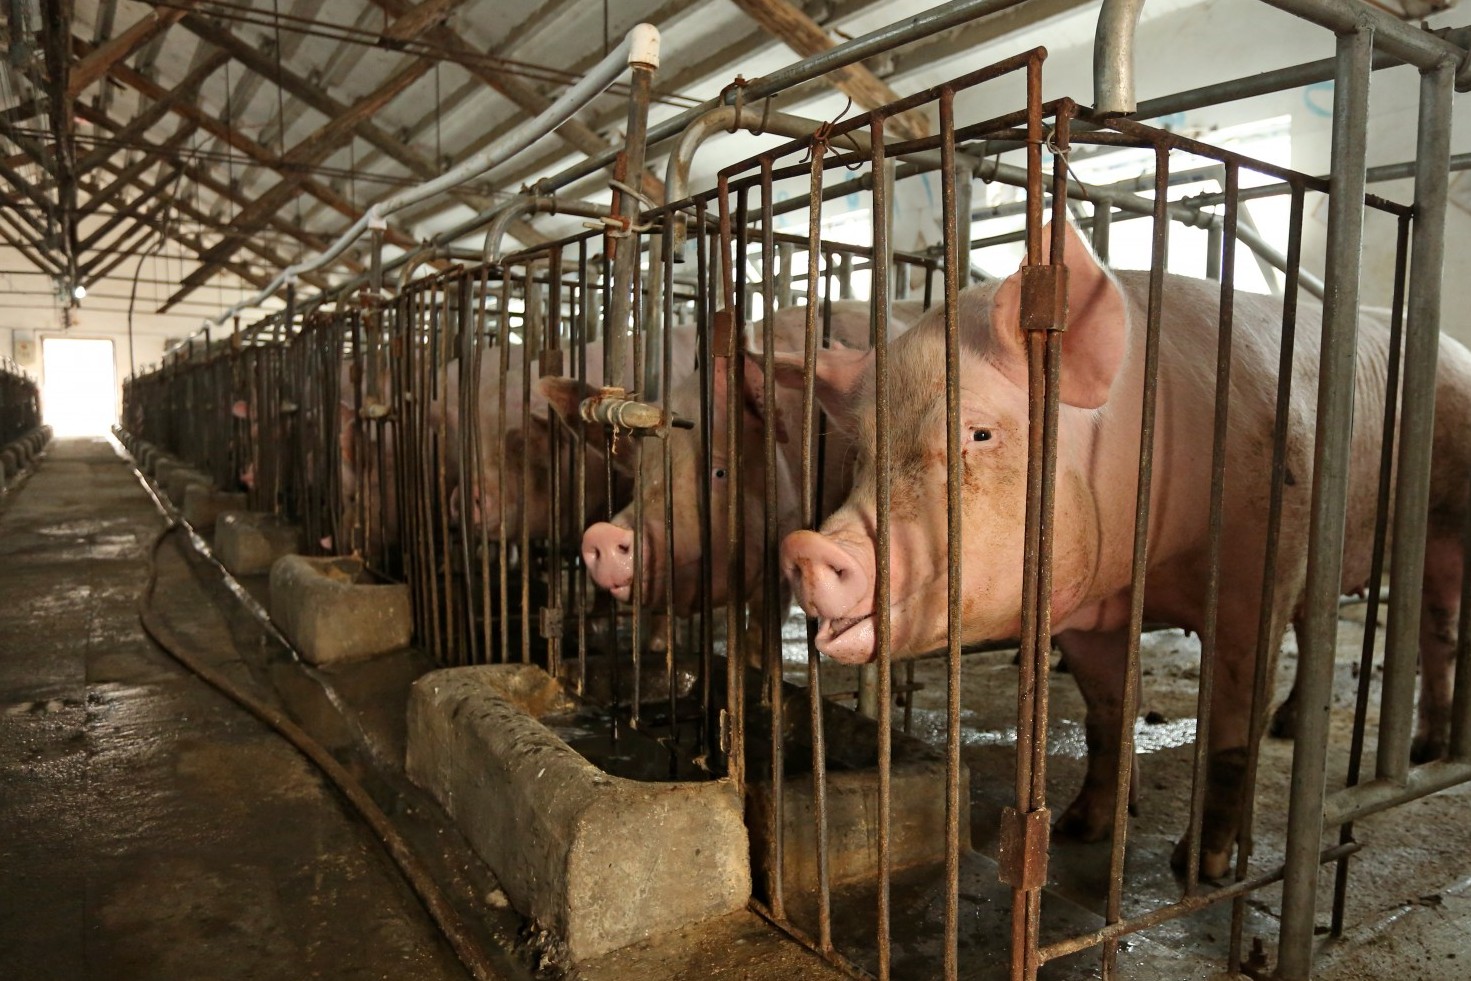 Pictured: Female breeding pigs kept in sow stalls